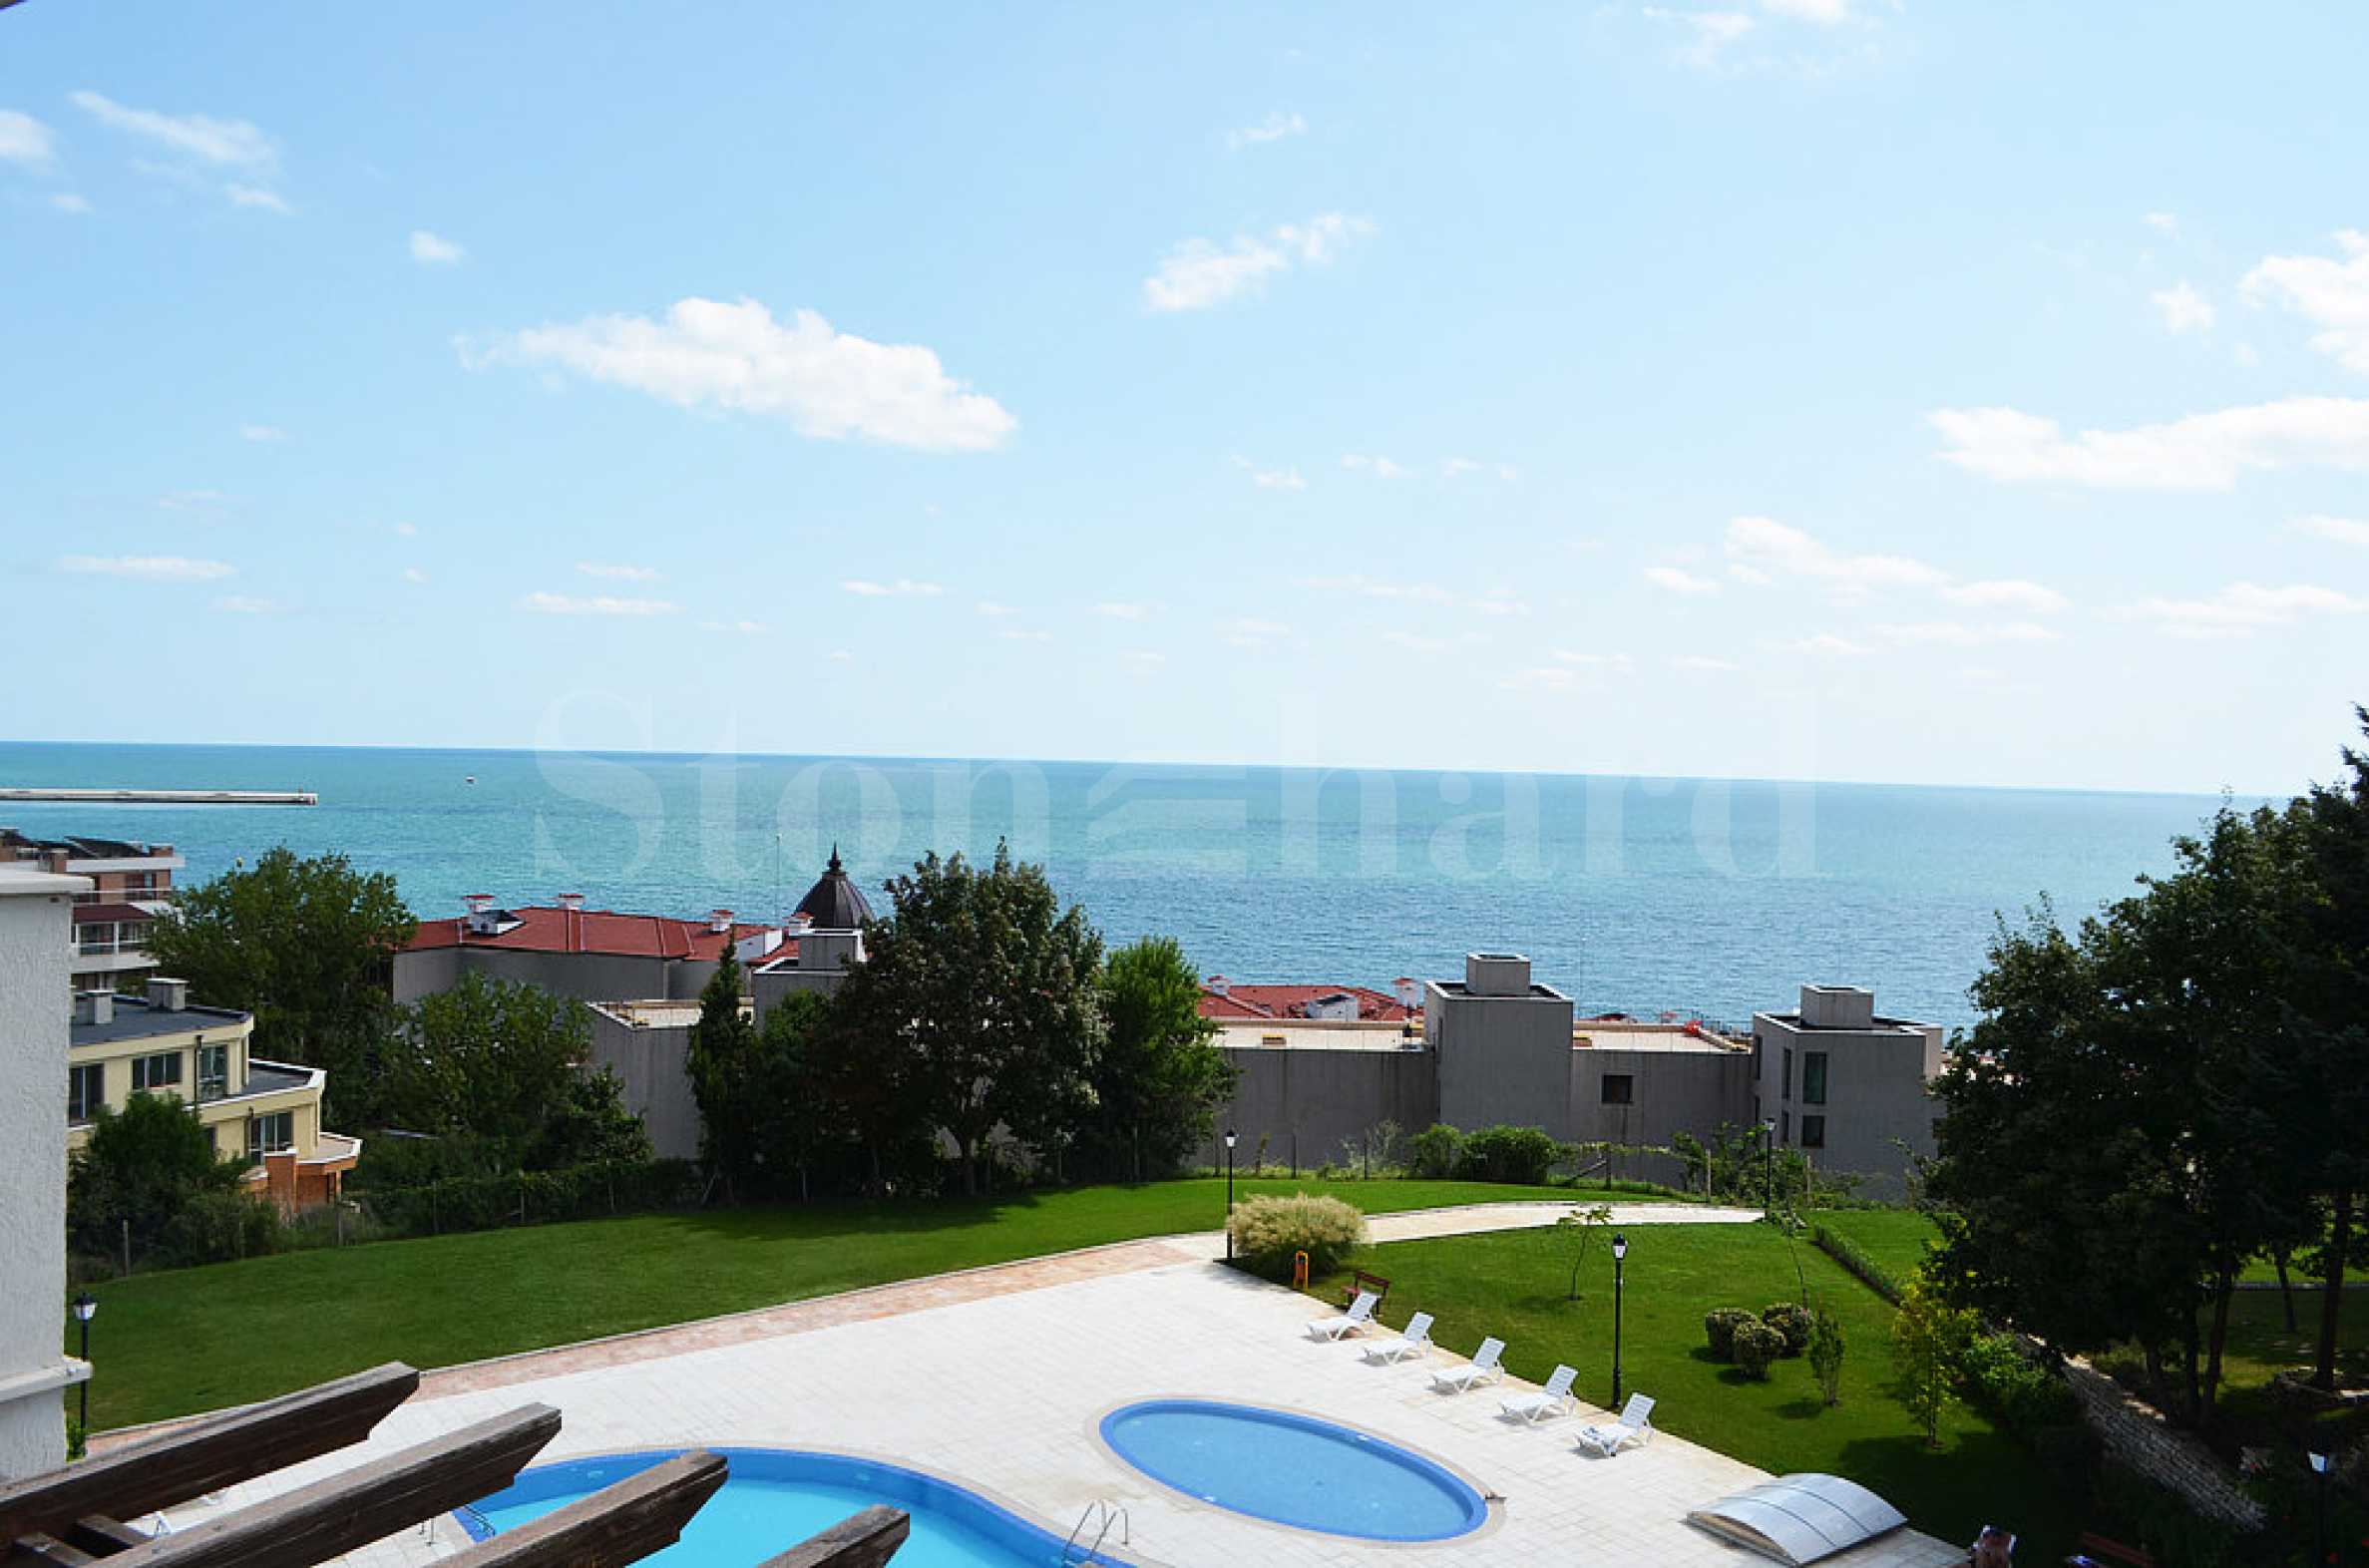 New apartments in a luxury complex in a picturesque seaside area 2 - Stonehard